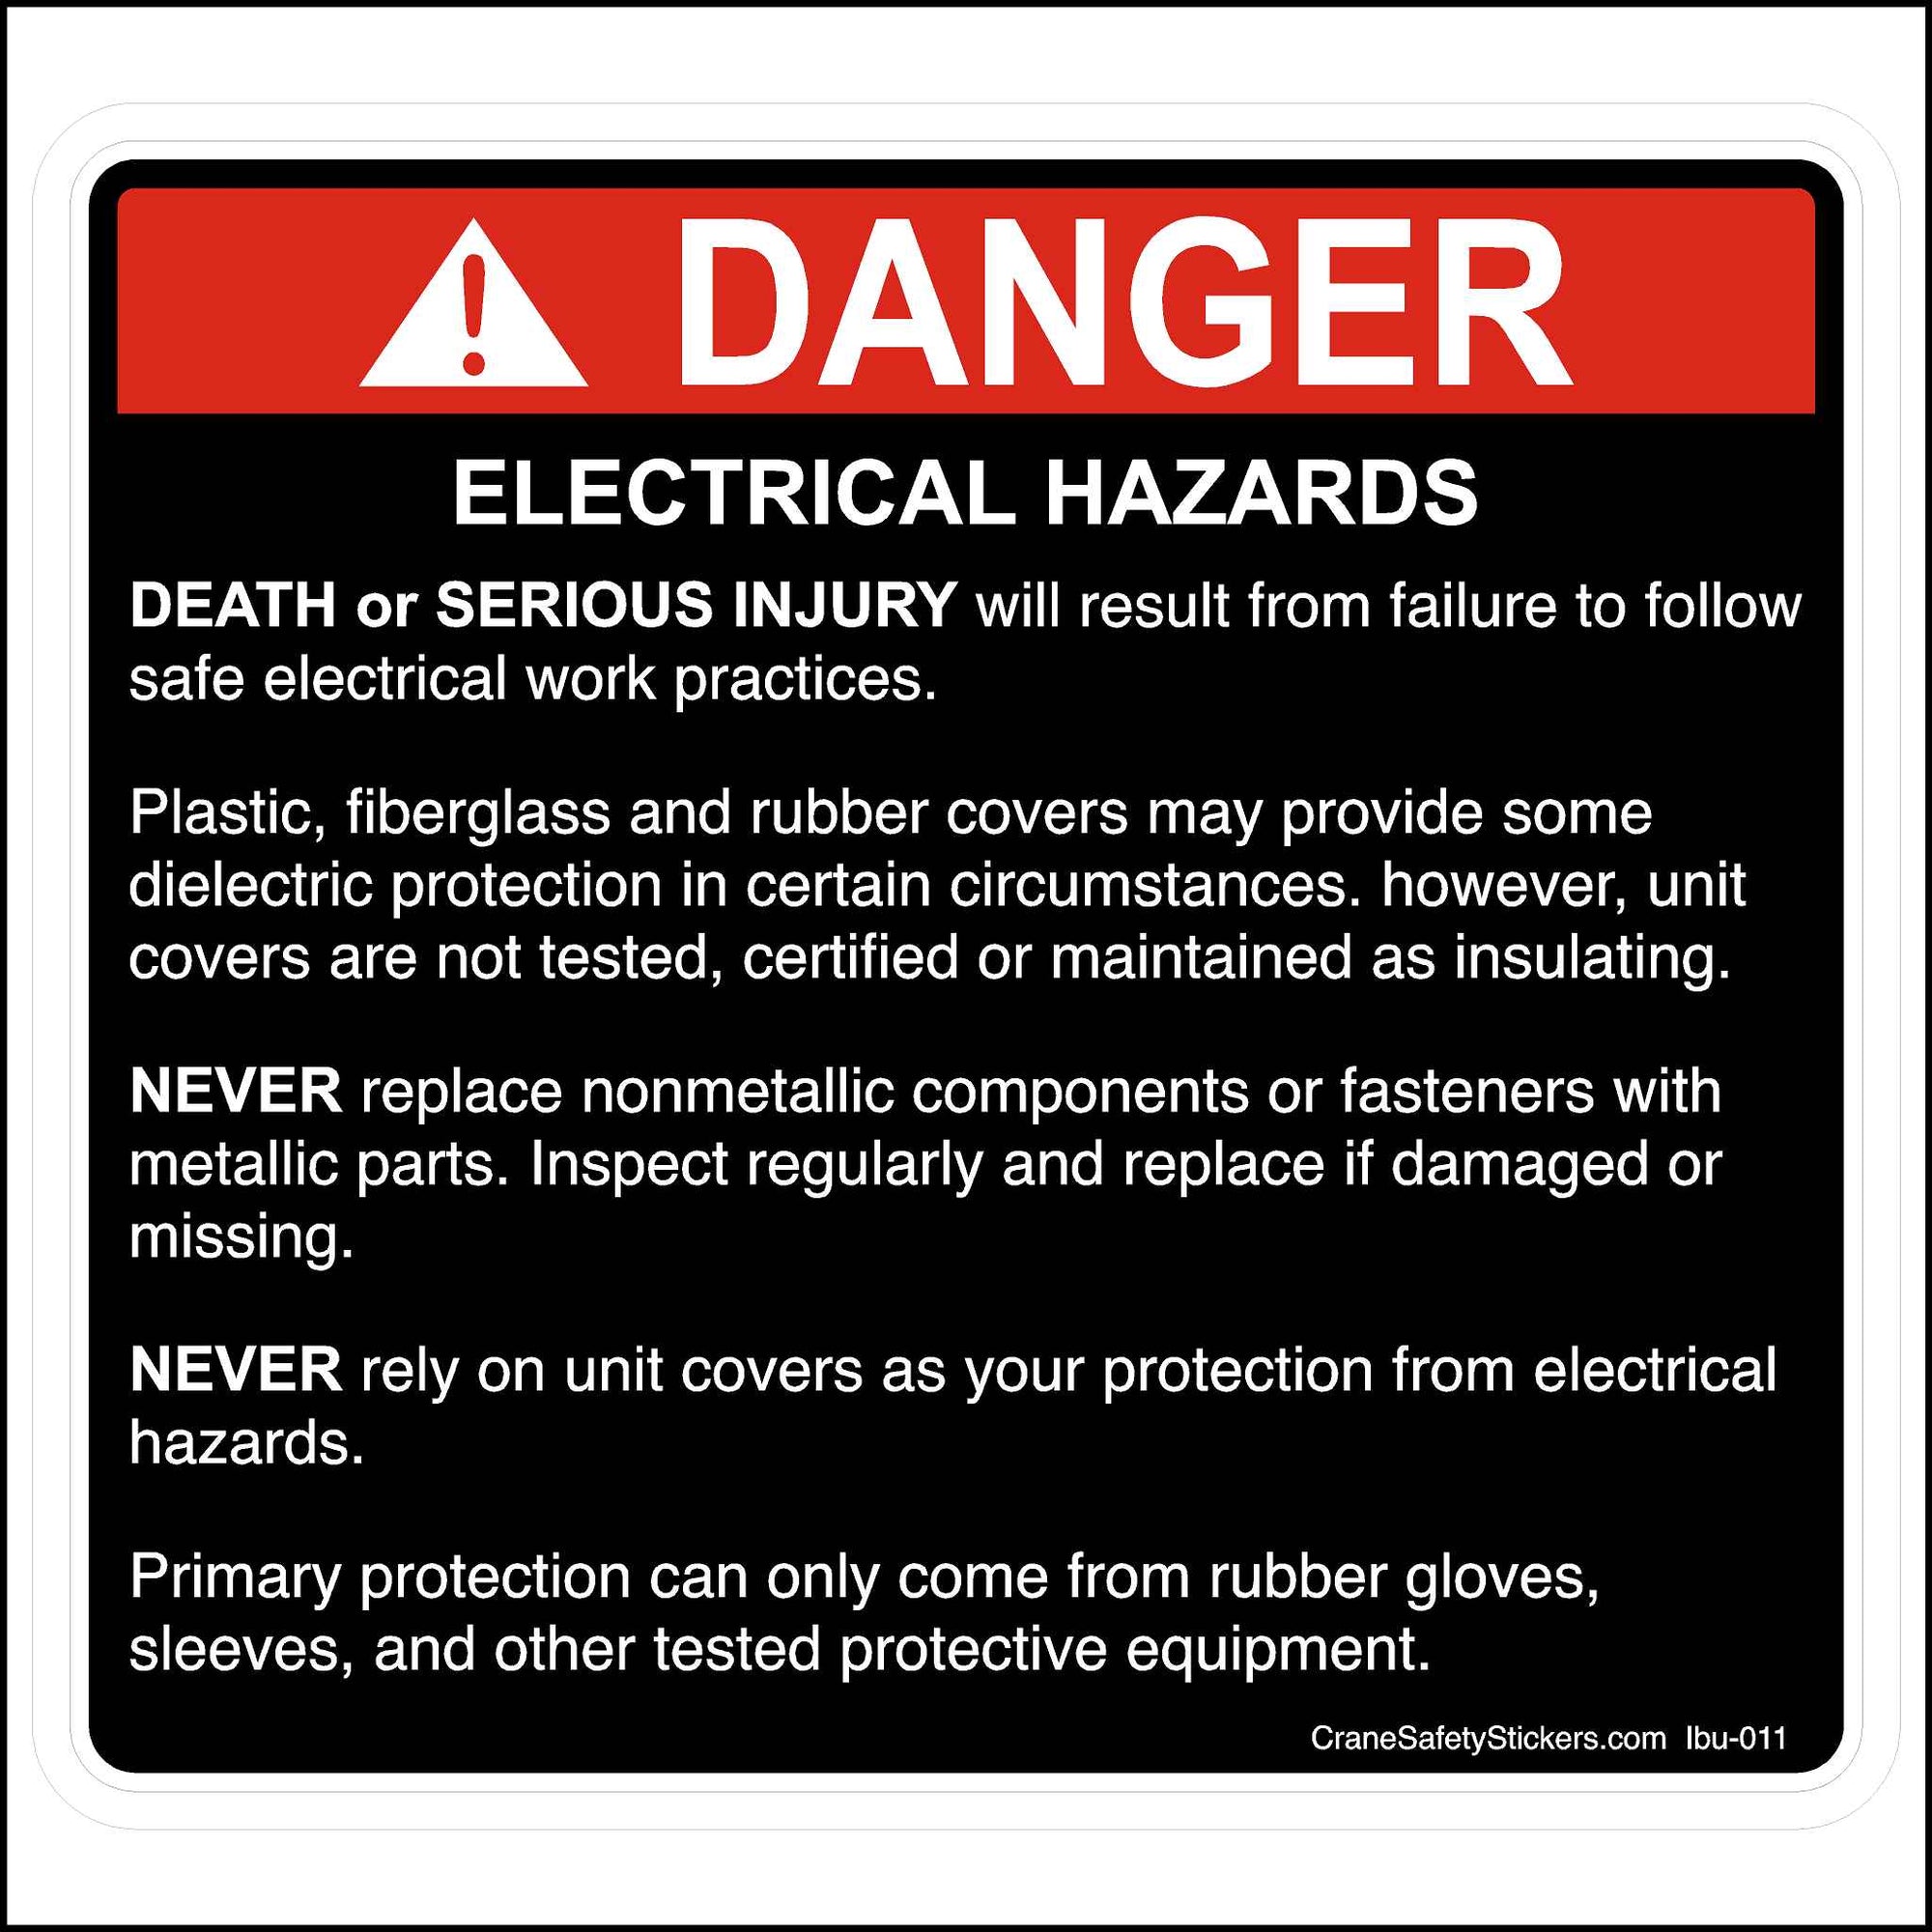 Failure To Follow Safe Electrical Practices Sticker Is Printed With. DANGER! ELECTRICAL HAZARDS DEATH or SERIOUS INJURY will result from failure to follow safe electrical work practices. Plastic, fiberglass and rubber covers may provide some dielectric protection in certain circumstances. however, unit covers are not tested, certified or maintained as insulating. NEVER replace nonmetallic components or fasteners with metallic parts. Inspect regularly and replace if damaged or missing.